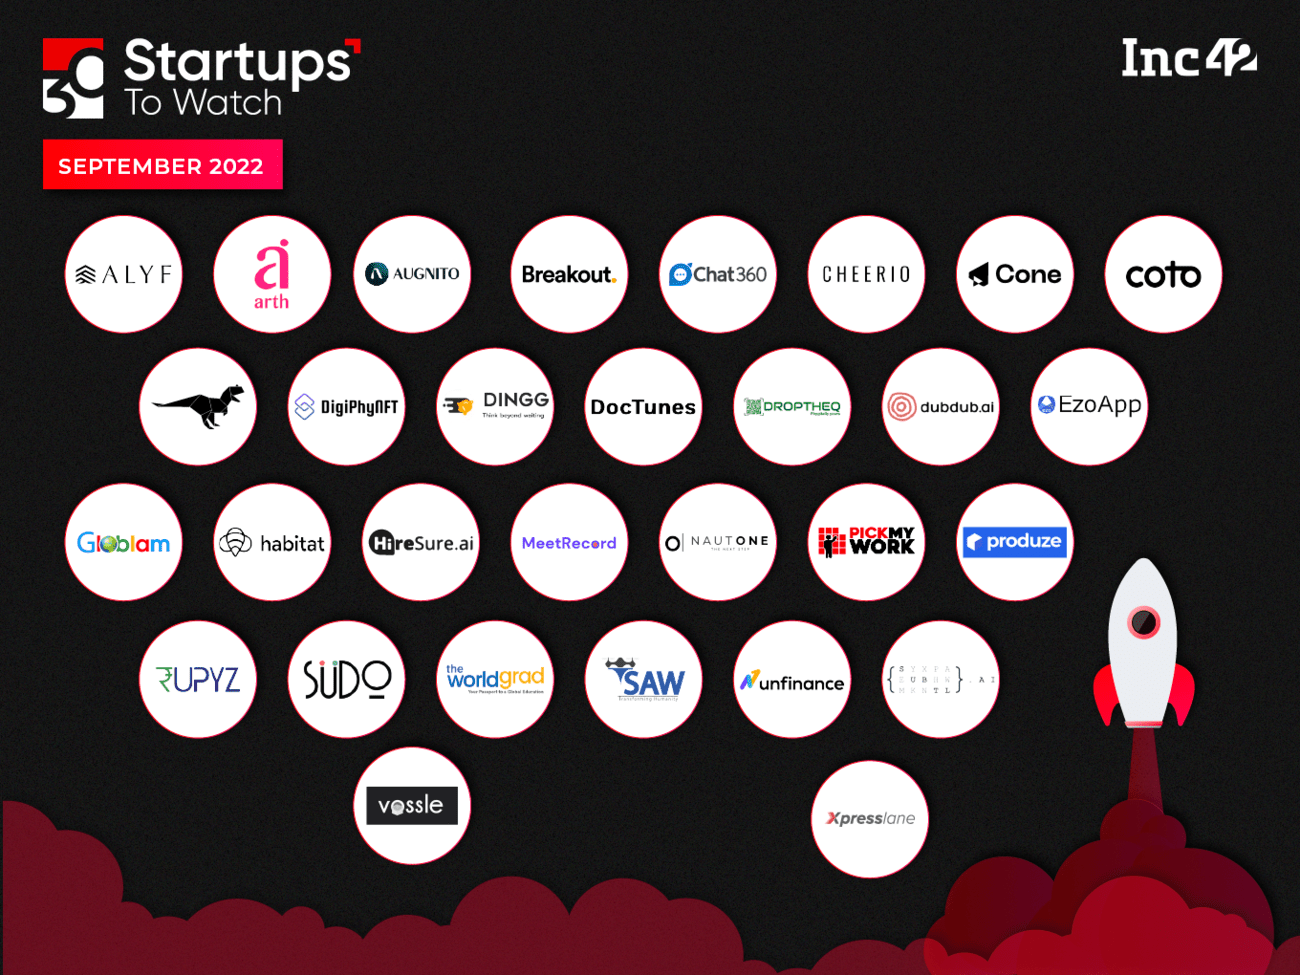 30 Startups to Watch Out by Inc42